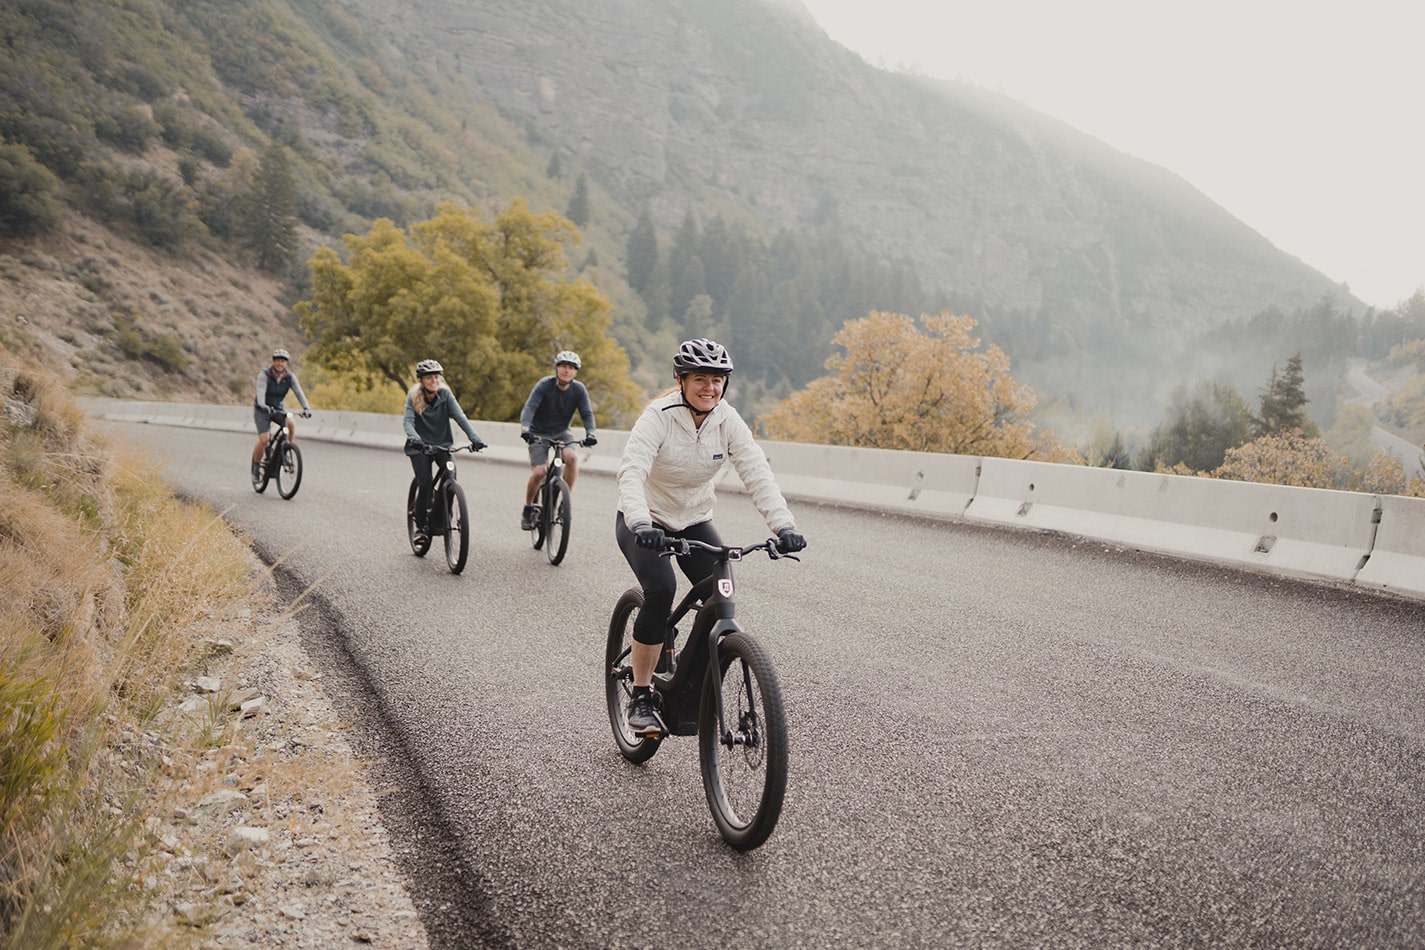 Group of people riding down the mountain on bikes